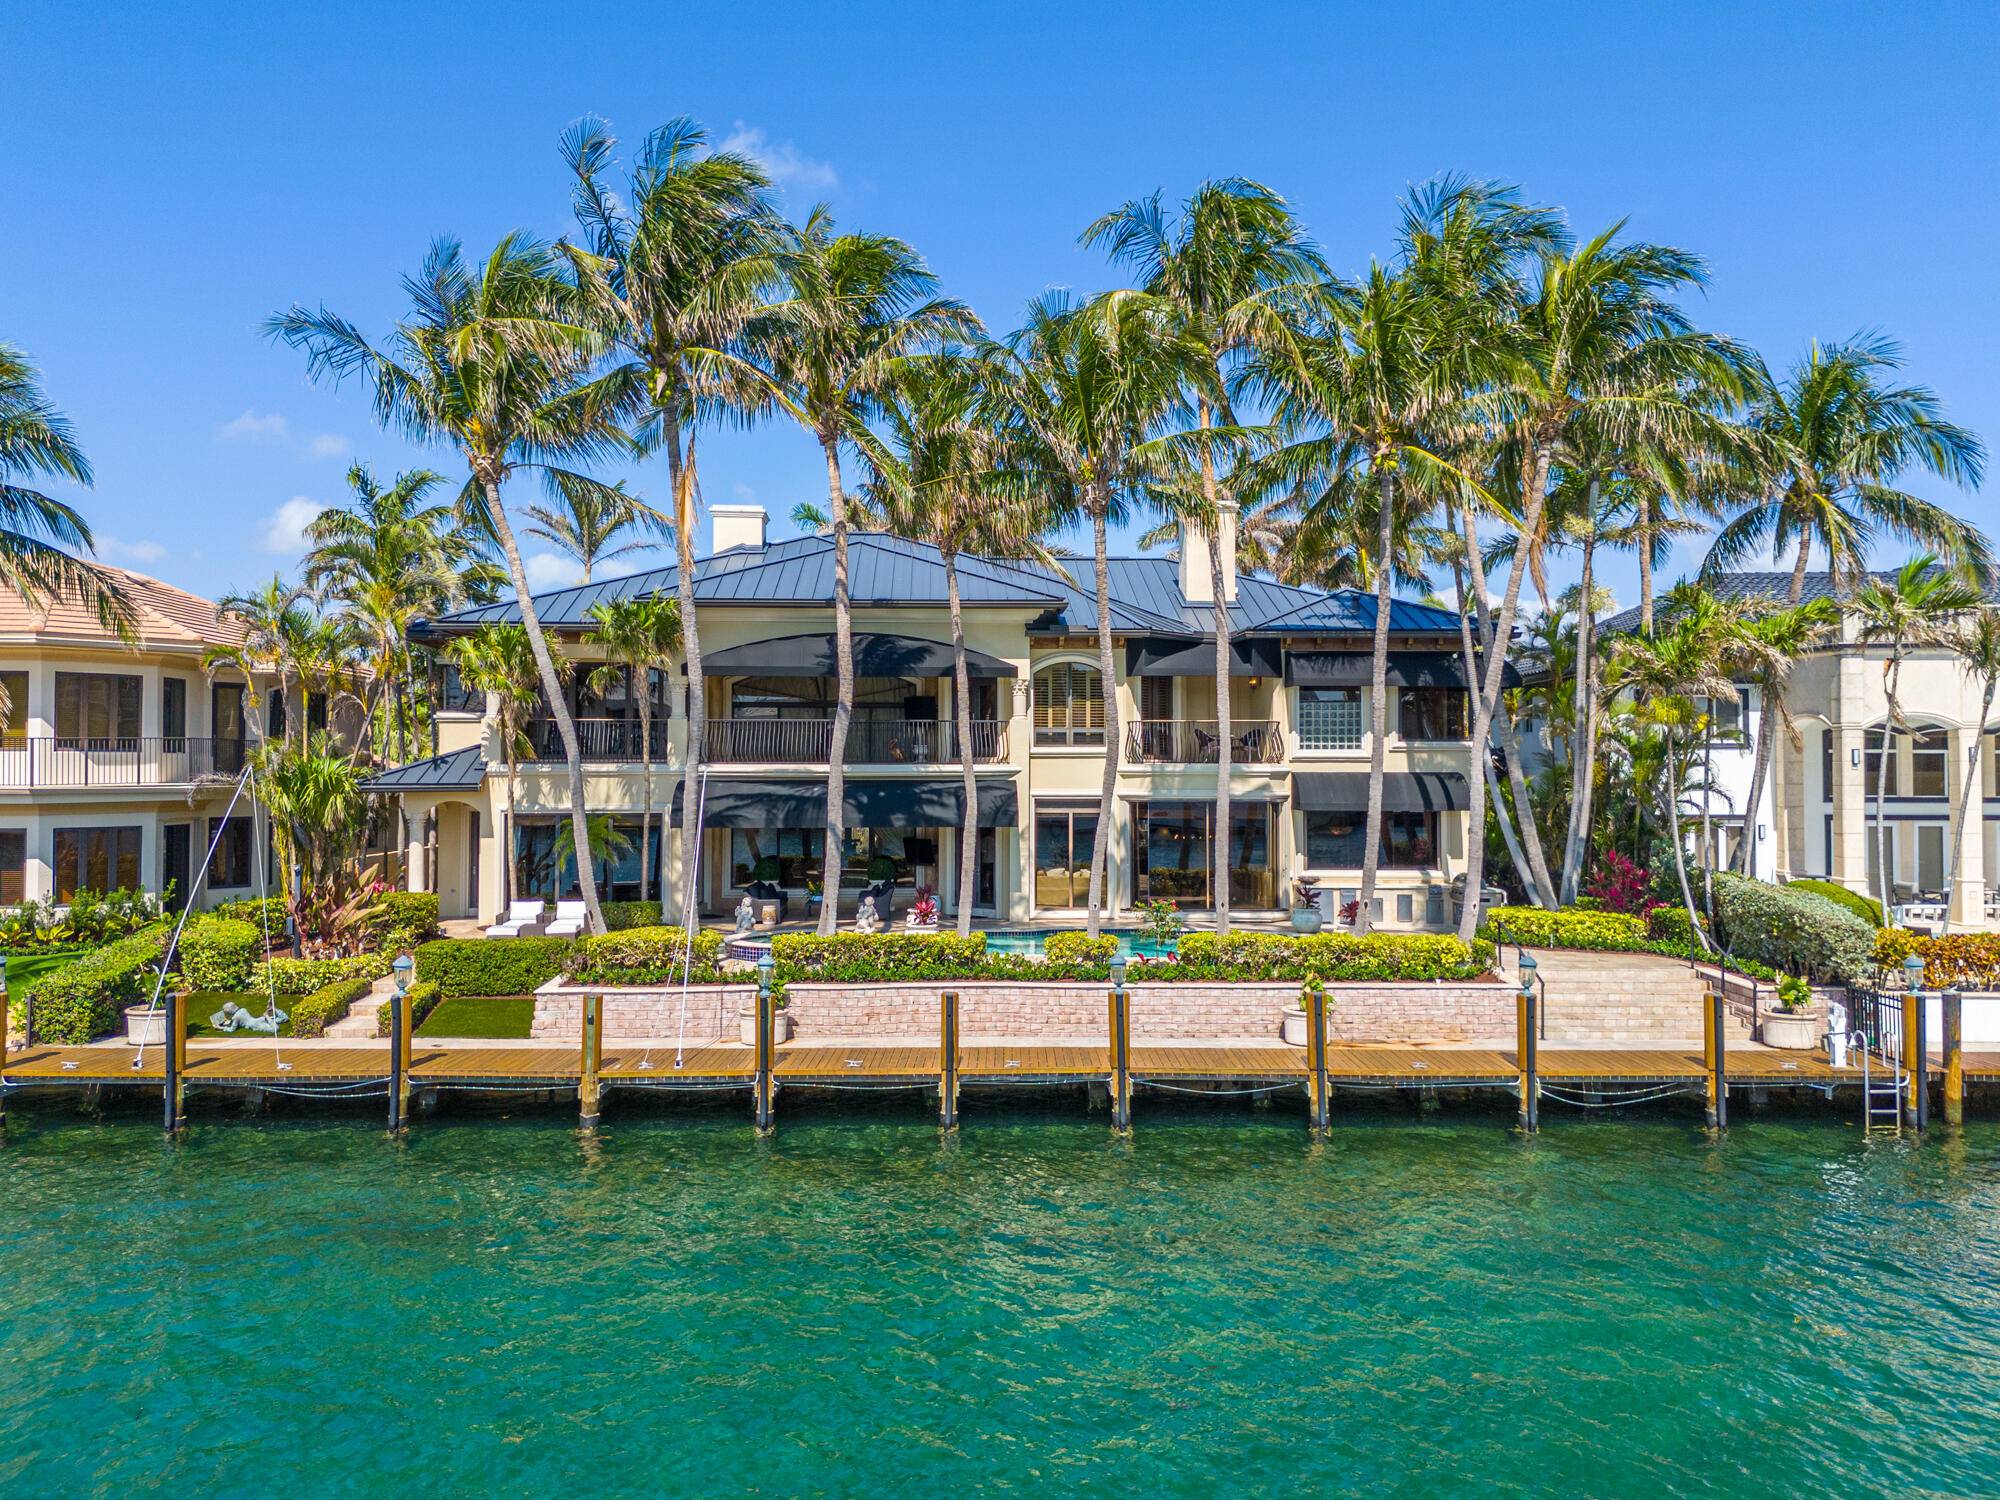 This exquisite and sophisticated Custom Estate home is a rare, prized property on the direct Intracoastal No Wake Zone with ample room to dock an 80' vessel, within minutes to ...